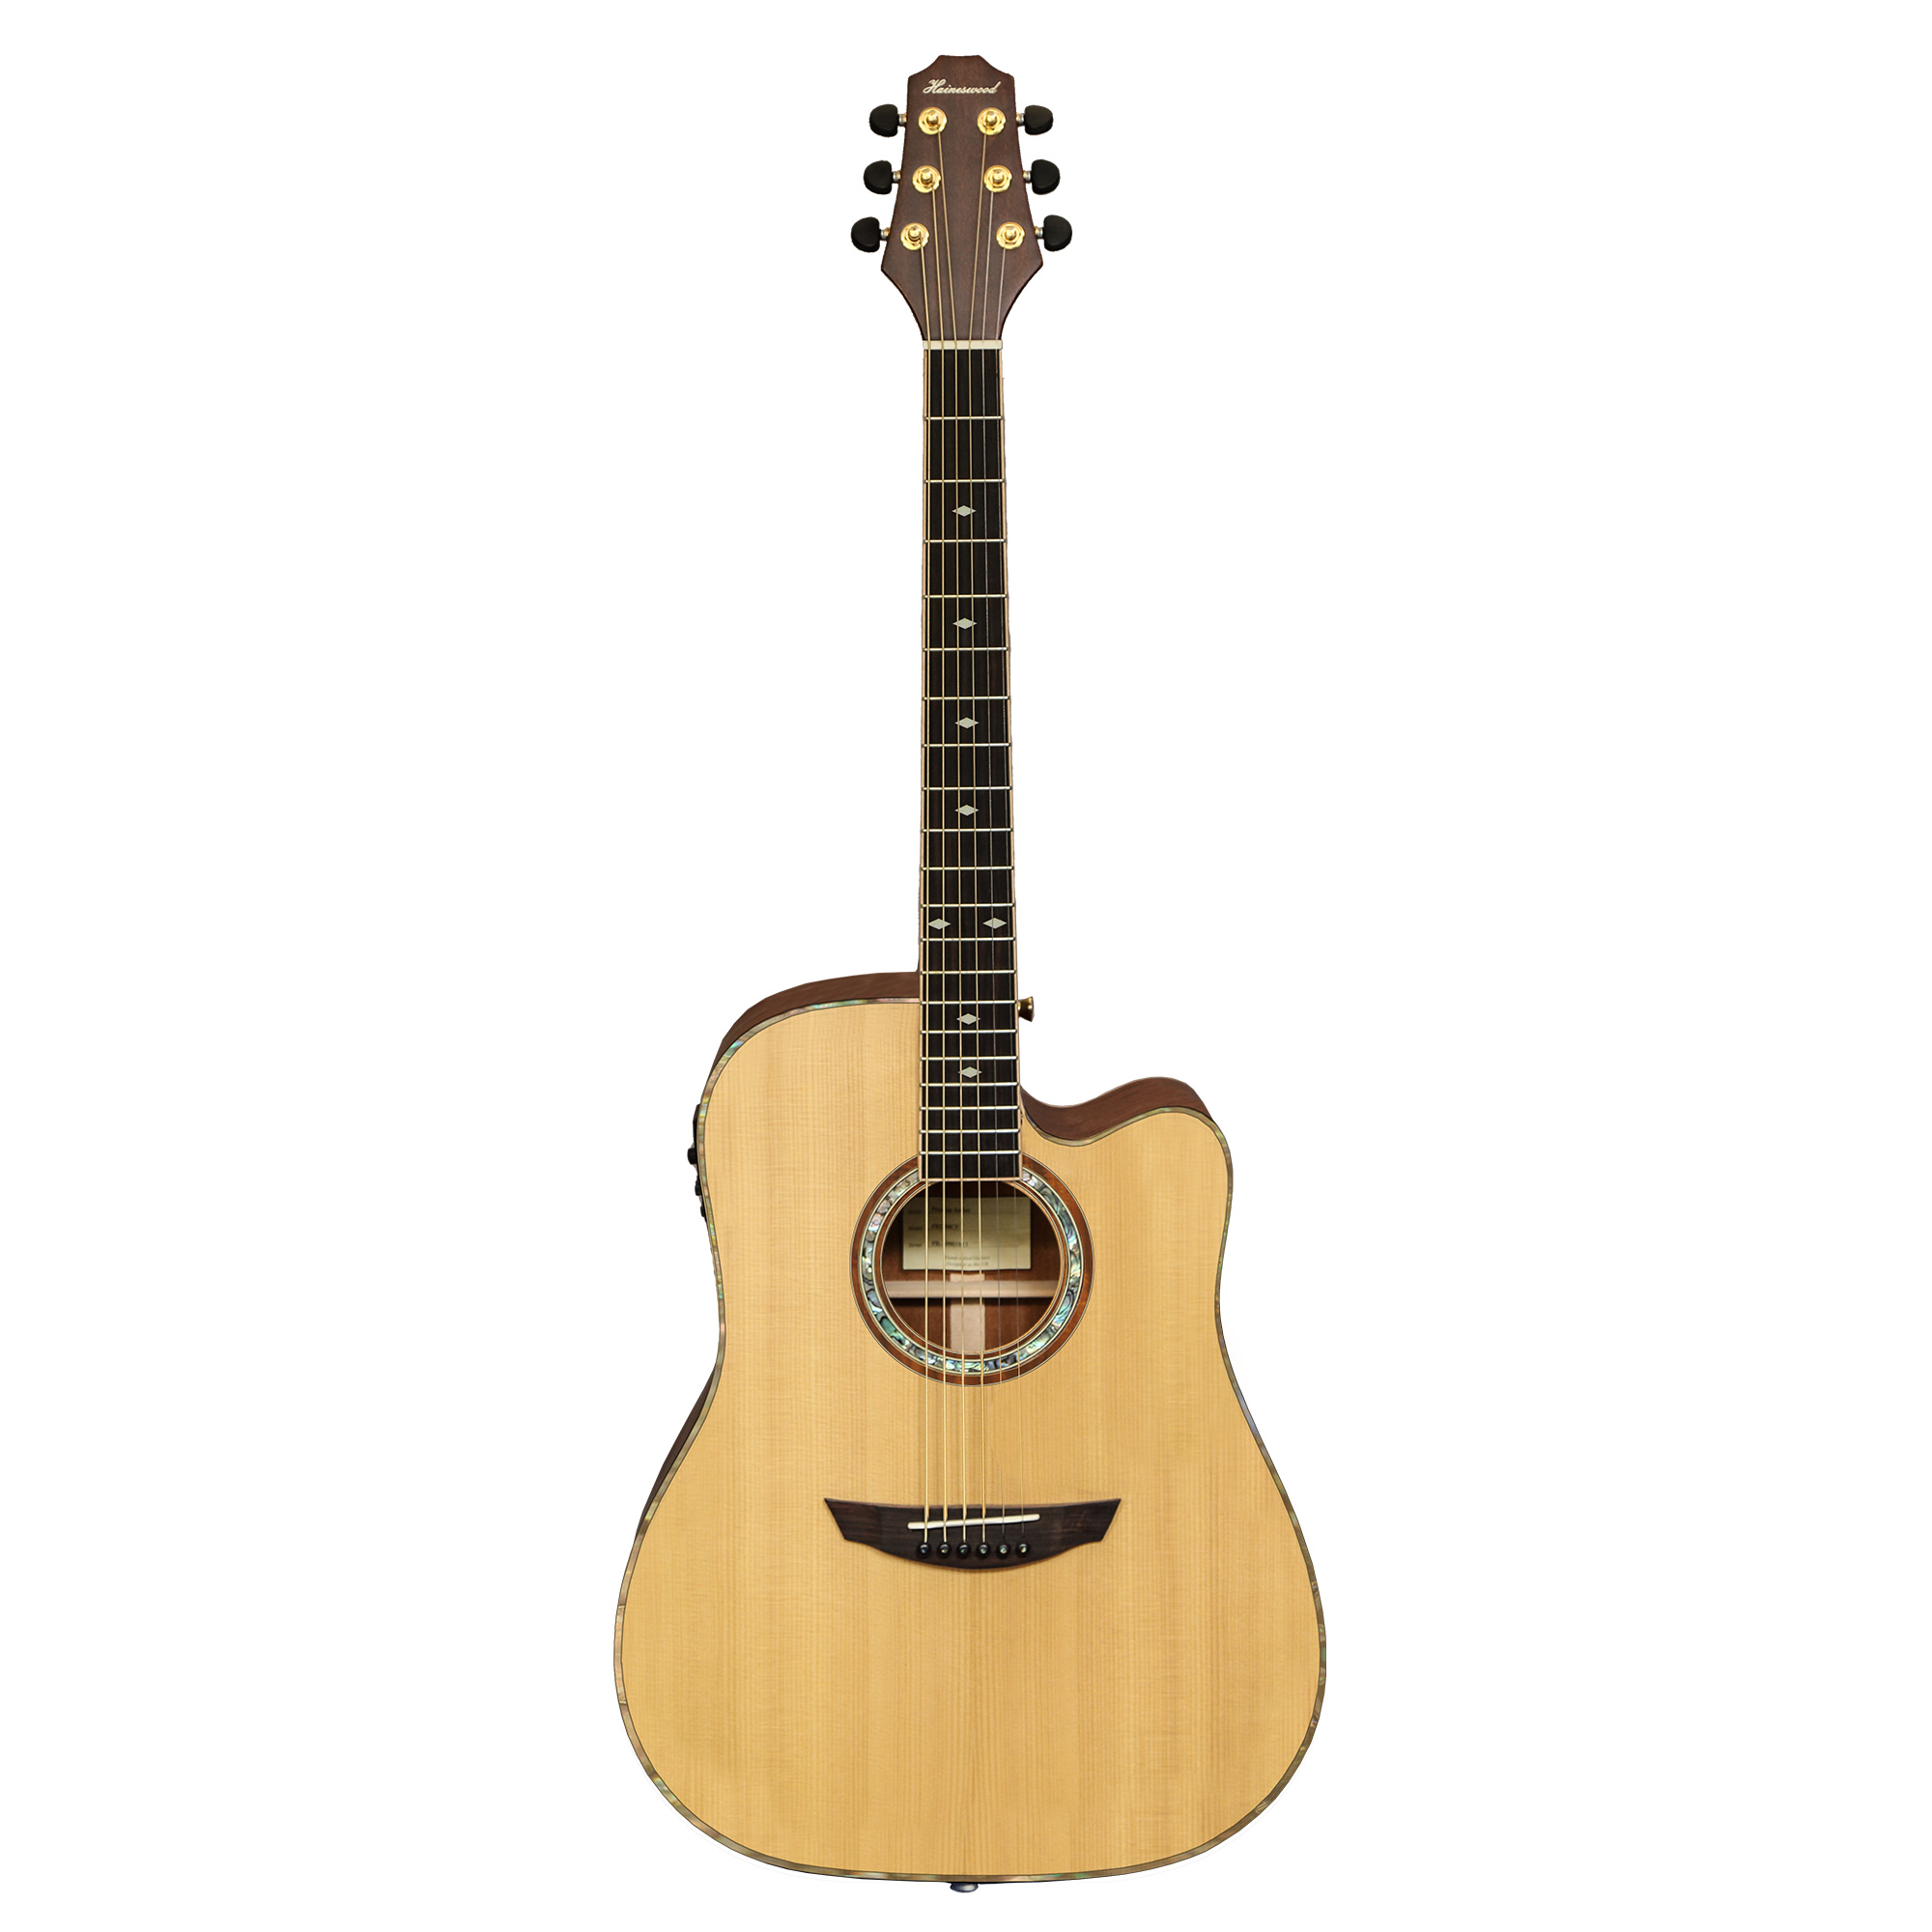 Haineswood Artist ARD85CE Dreadnought Cutaway Electro